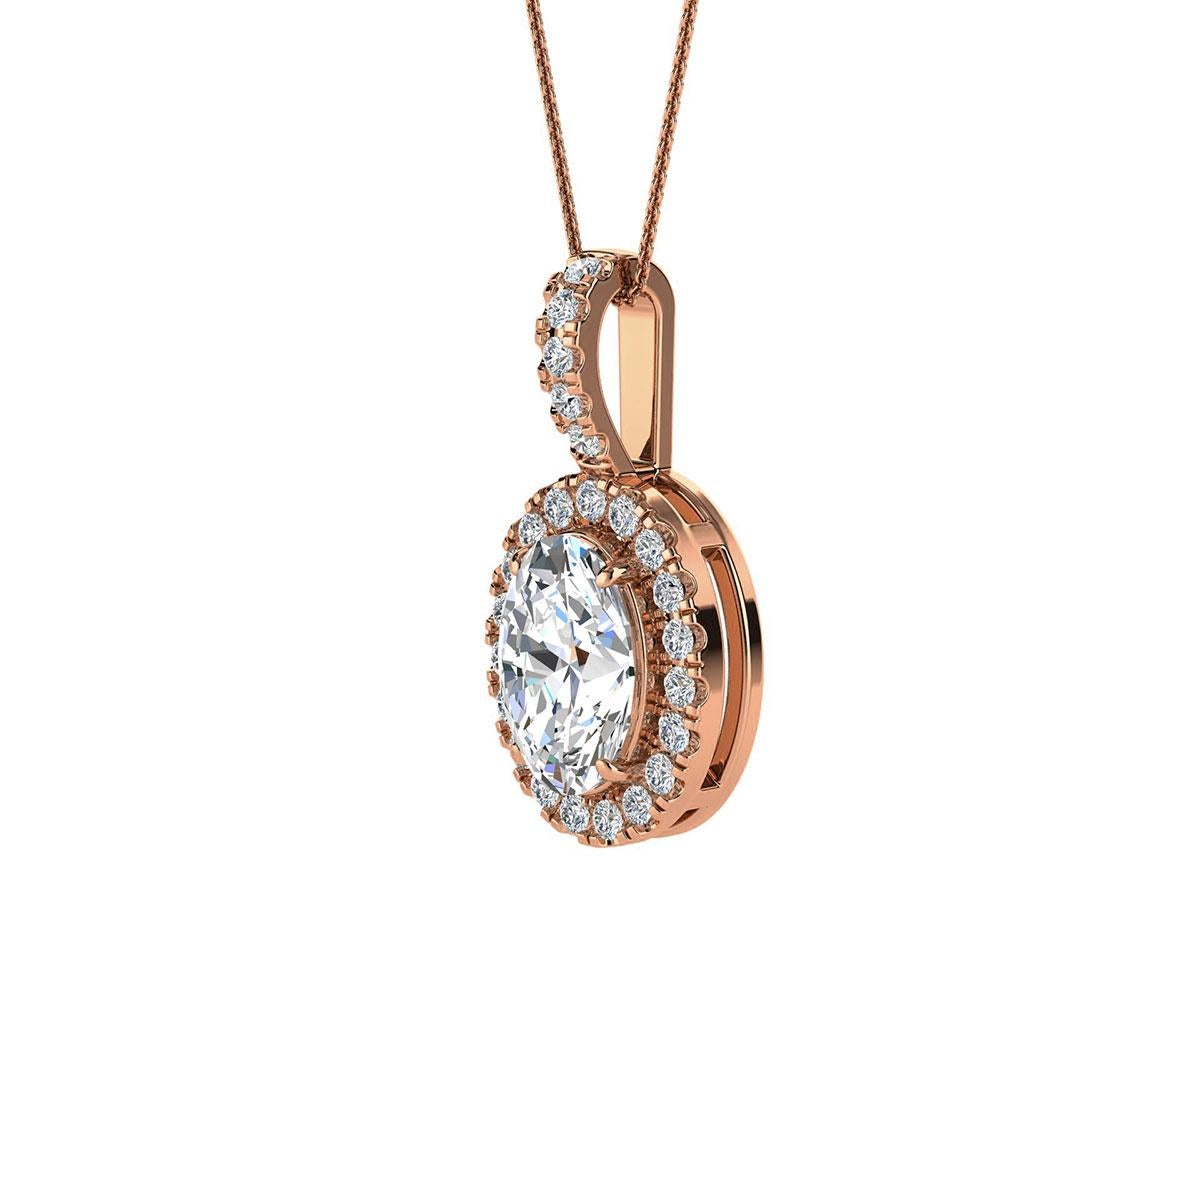 This delicate pendant features one oval-shaped diamond that is approximately 0.70-carat total weight ( 7mm x 5mm) encircled by a halo of perfectly matched 24 brilliant round diamonds in about 0.12-carat total weight. The pendant is measuring at 16